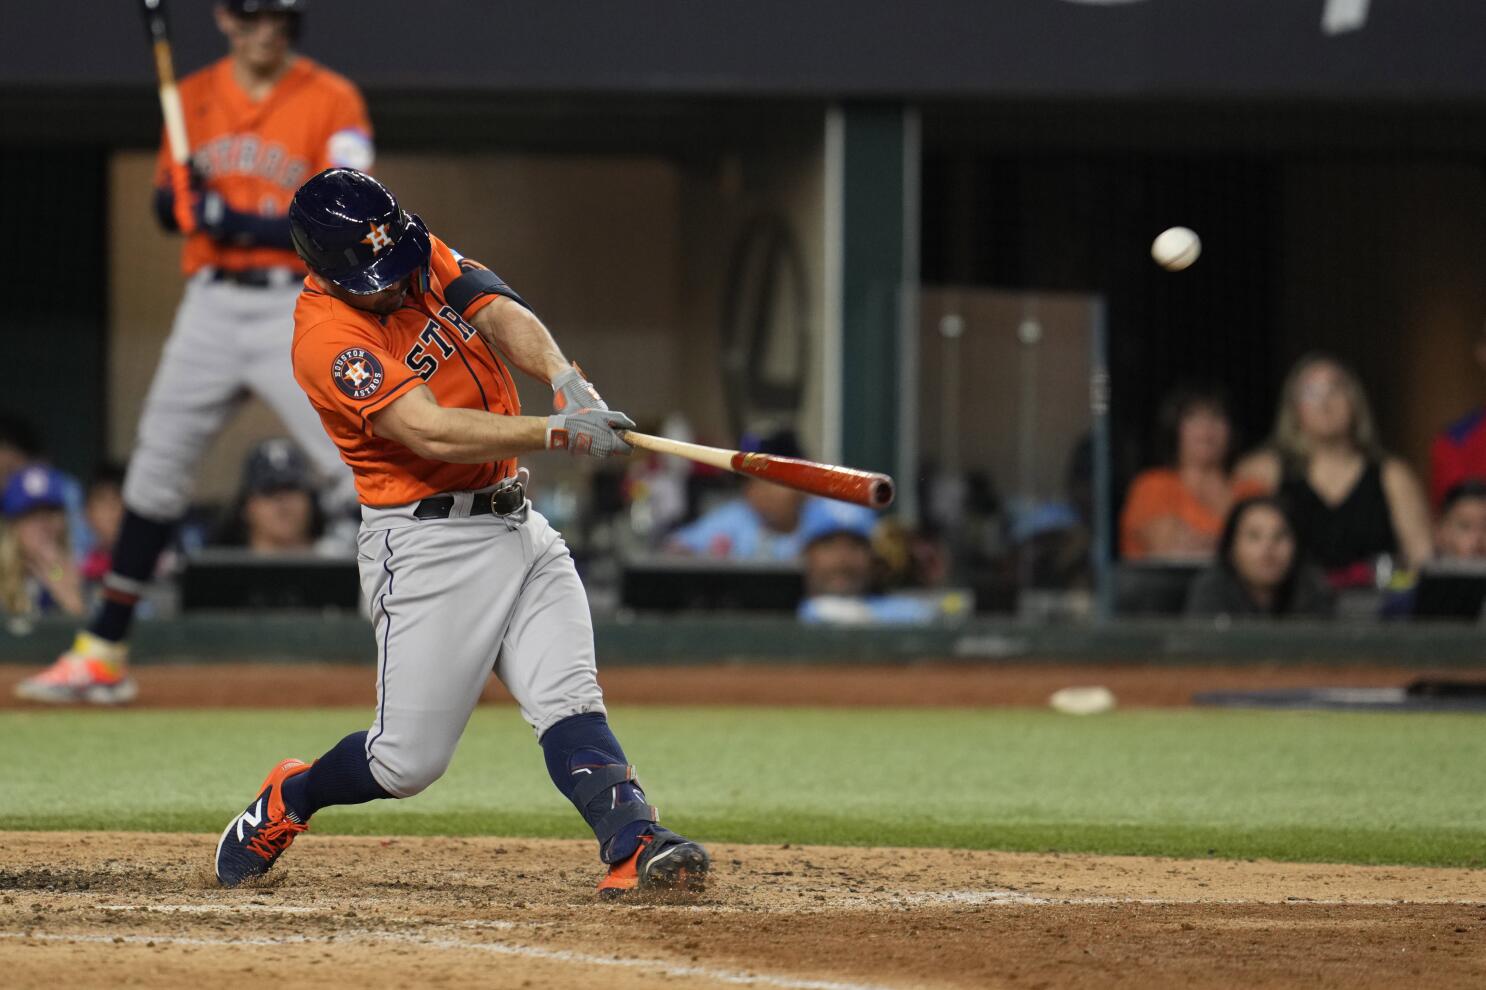 Houston Astros Martin Maldonado (15) breaks his bat on the swing during the  fourth inning in Game 1 of baseball's American League Championship Series  between the Houston Astros and the New York